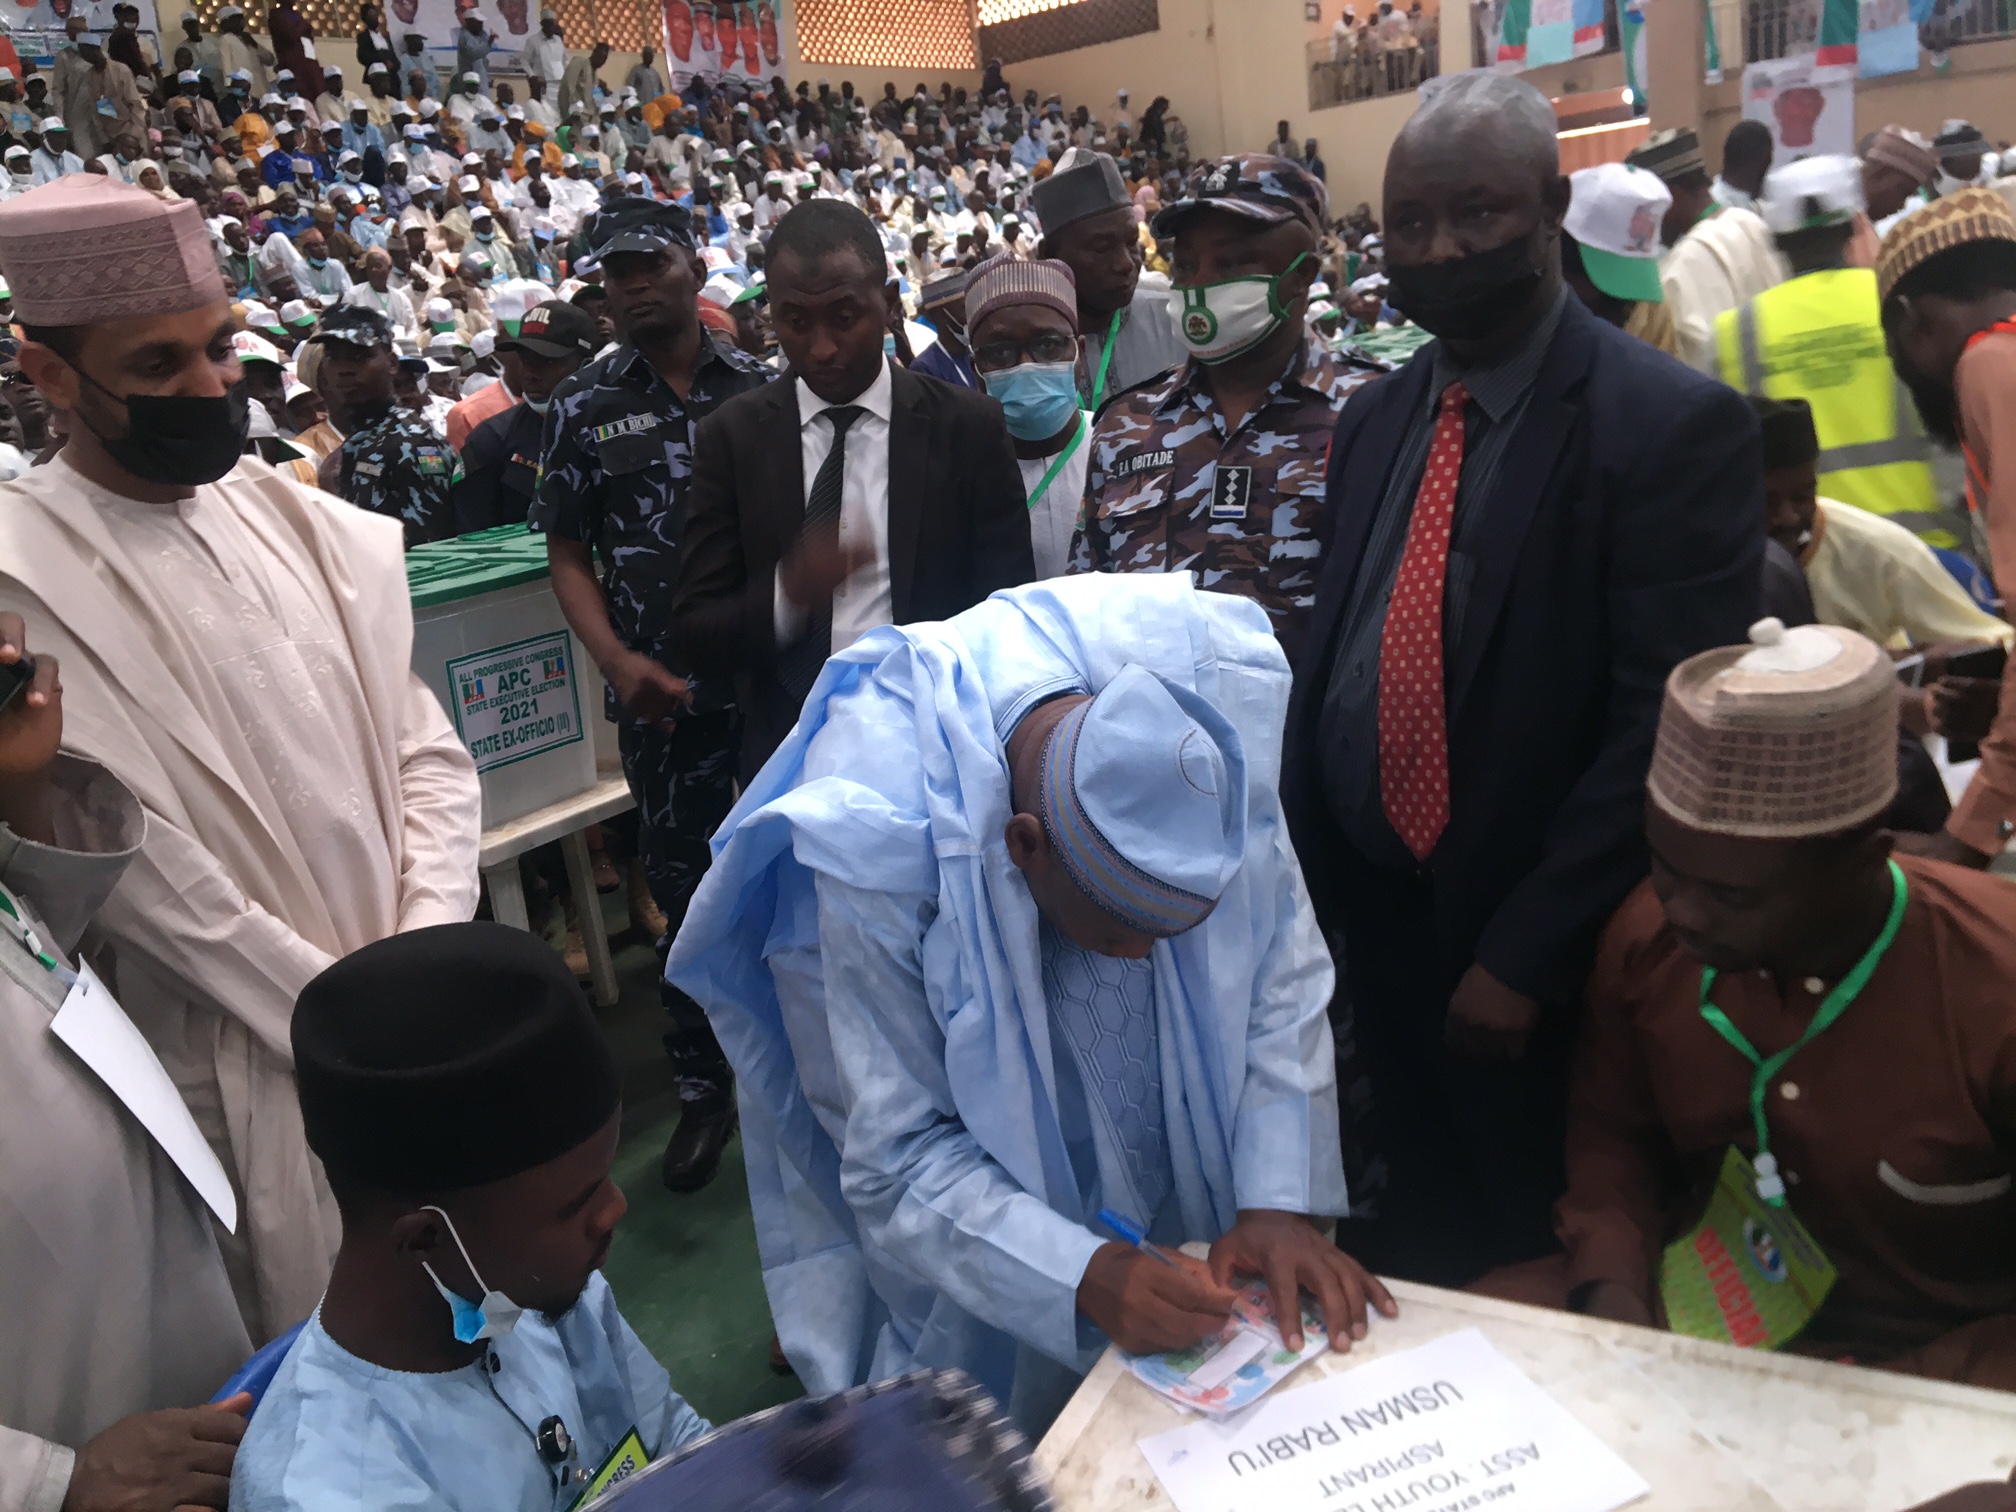 Kano State Governor, Abdullahi Umar Ganduje, cast his vote during the APC State Congress in Kano